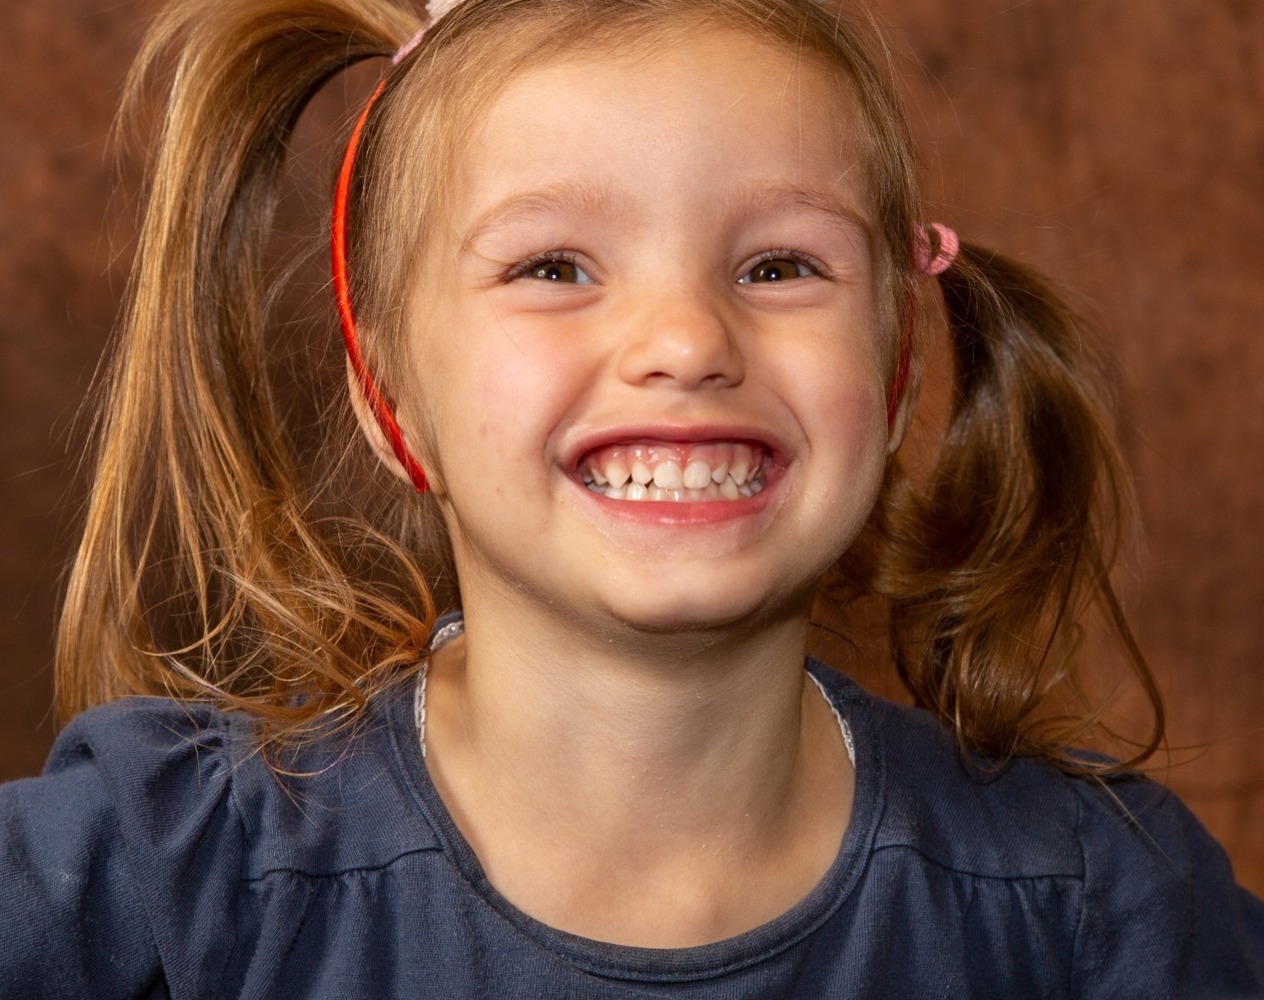 Cheeky smile by this pre-school girl in her school photography